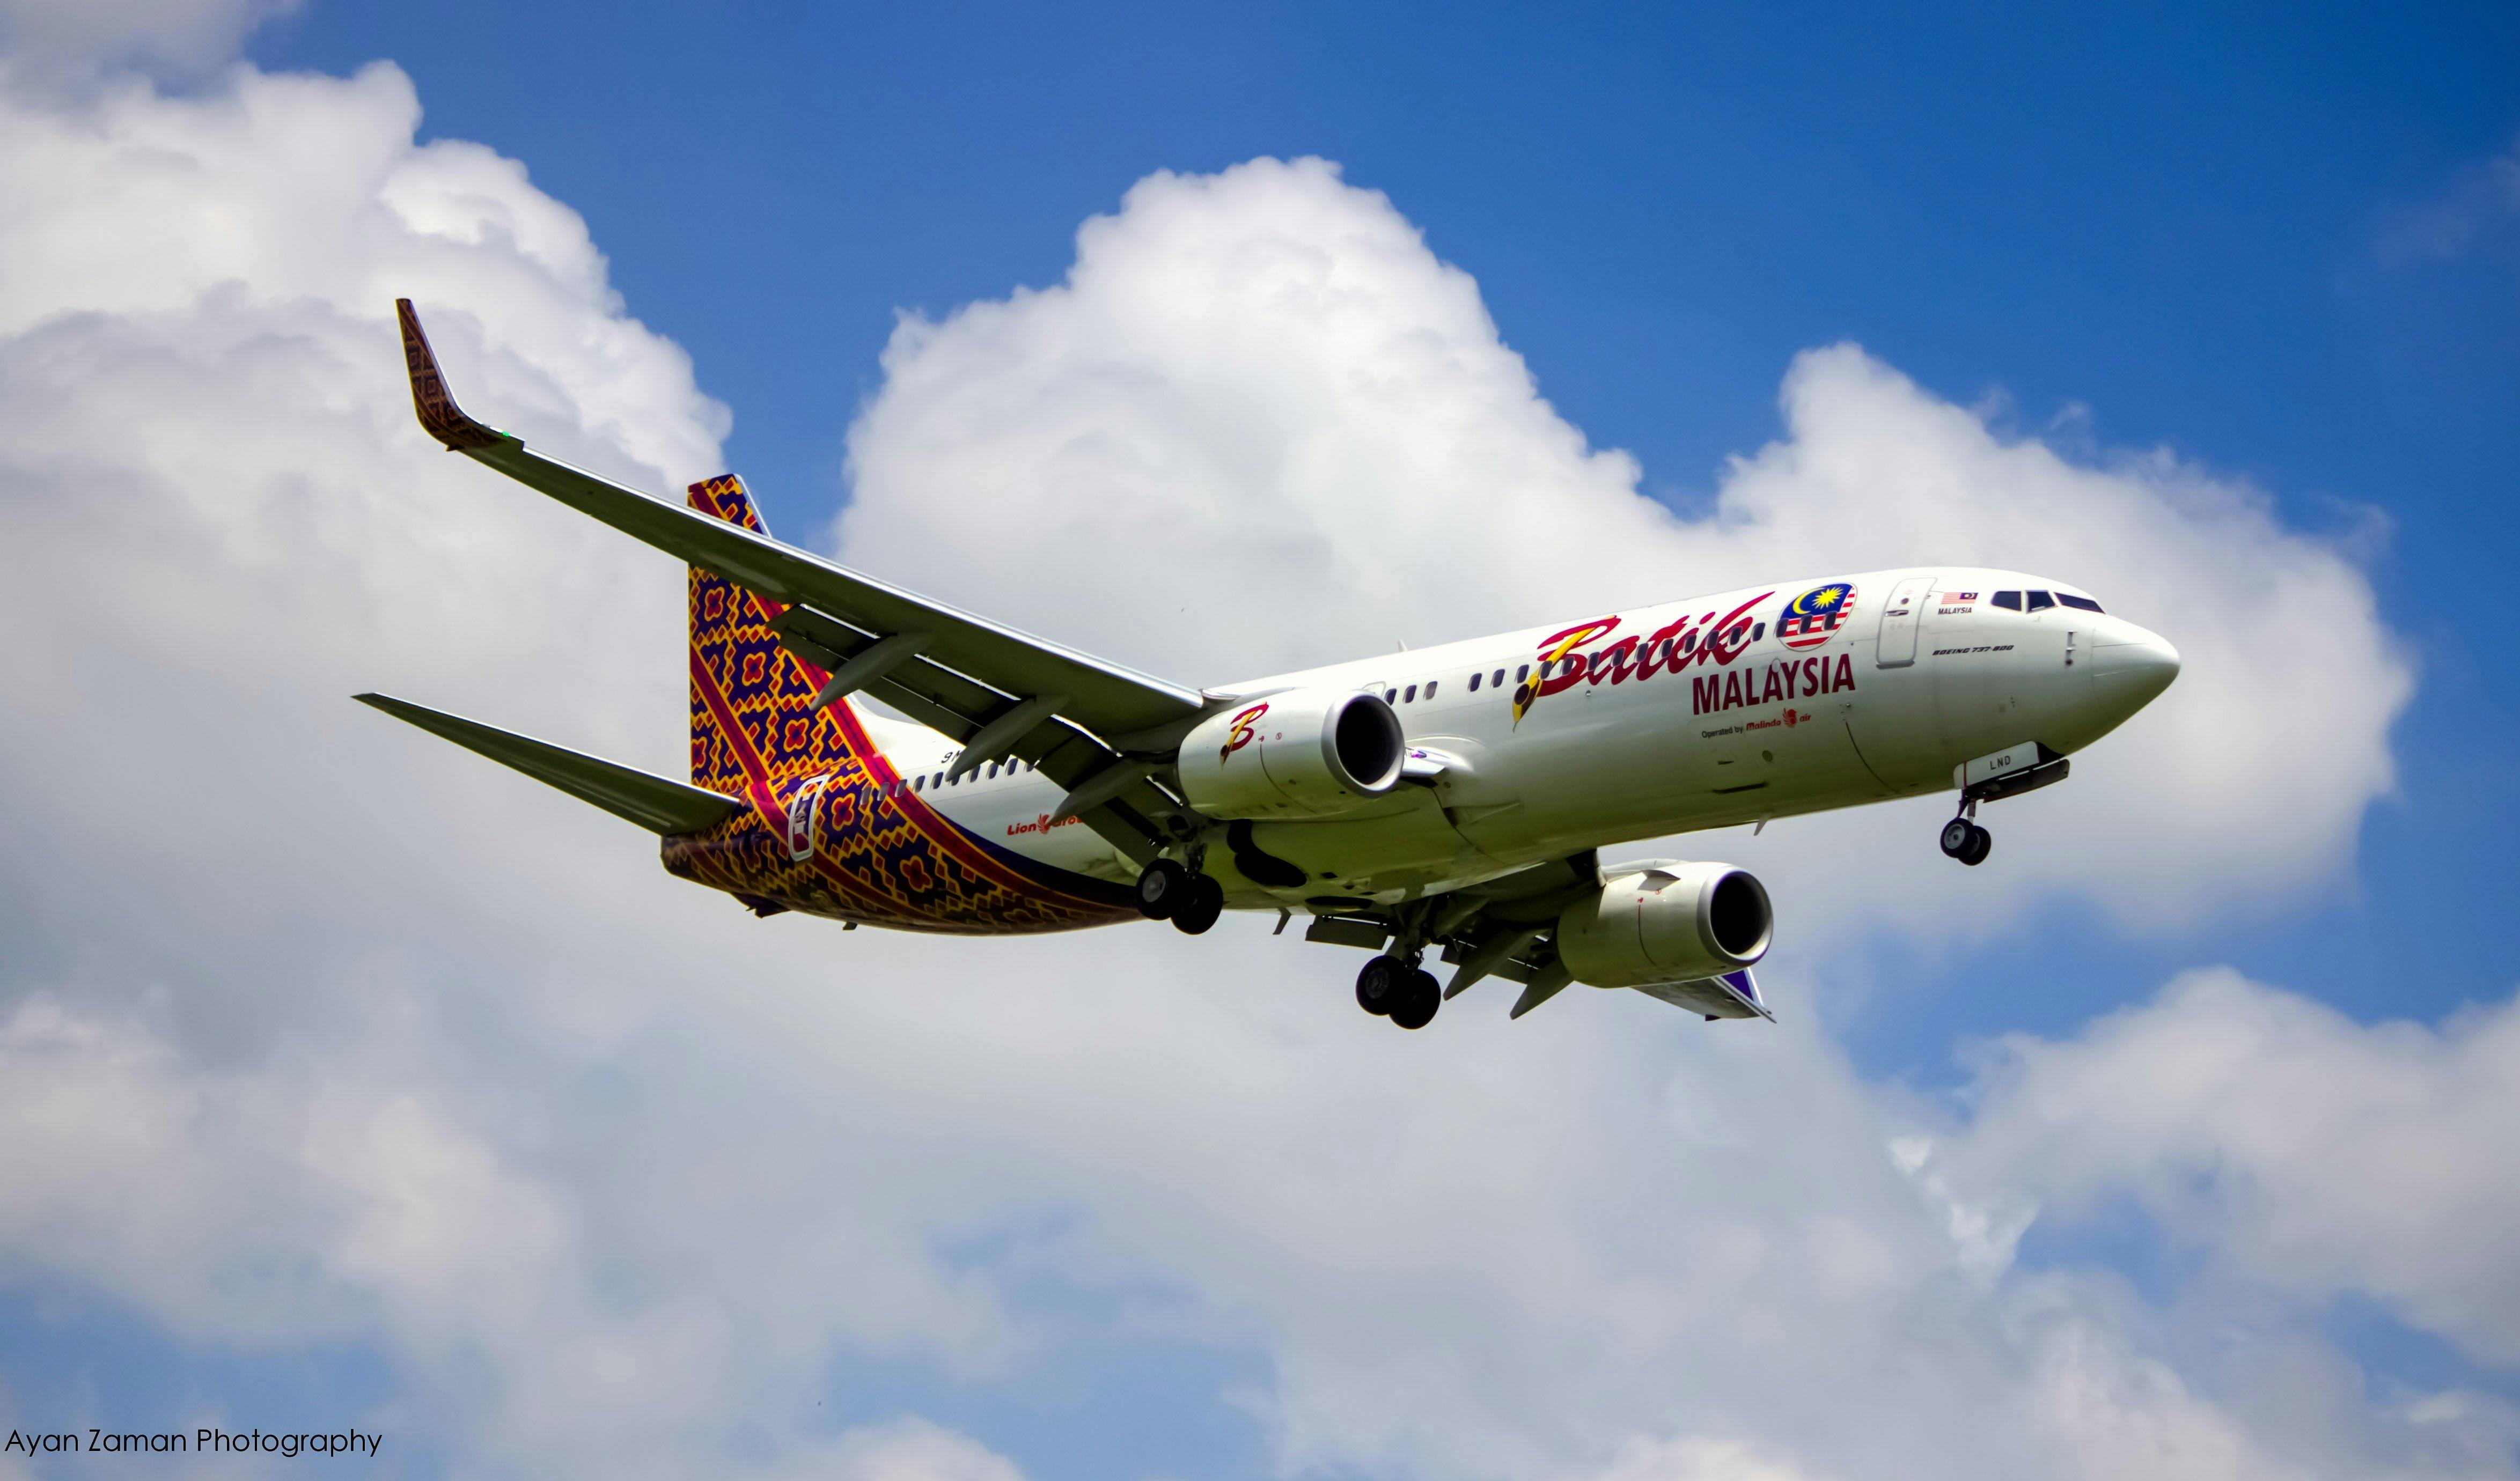 Free stock photo of airlines, Batik Air Malaysia